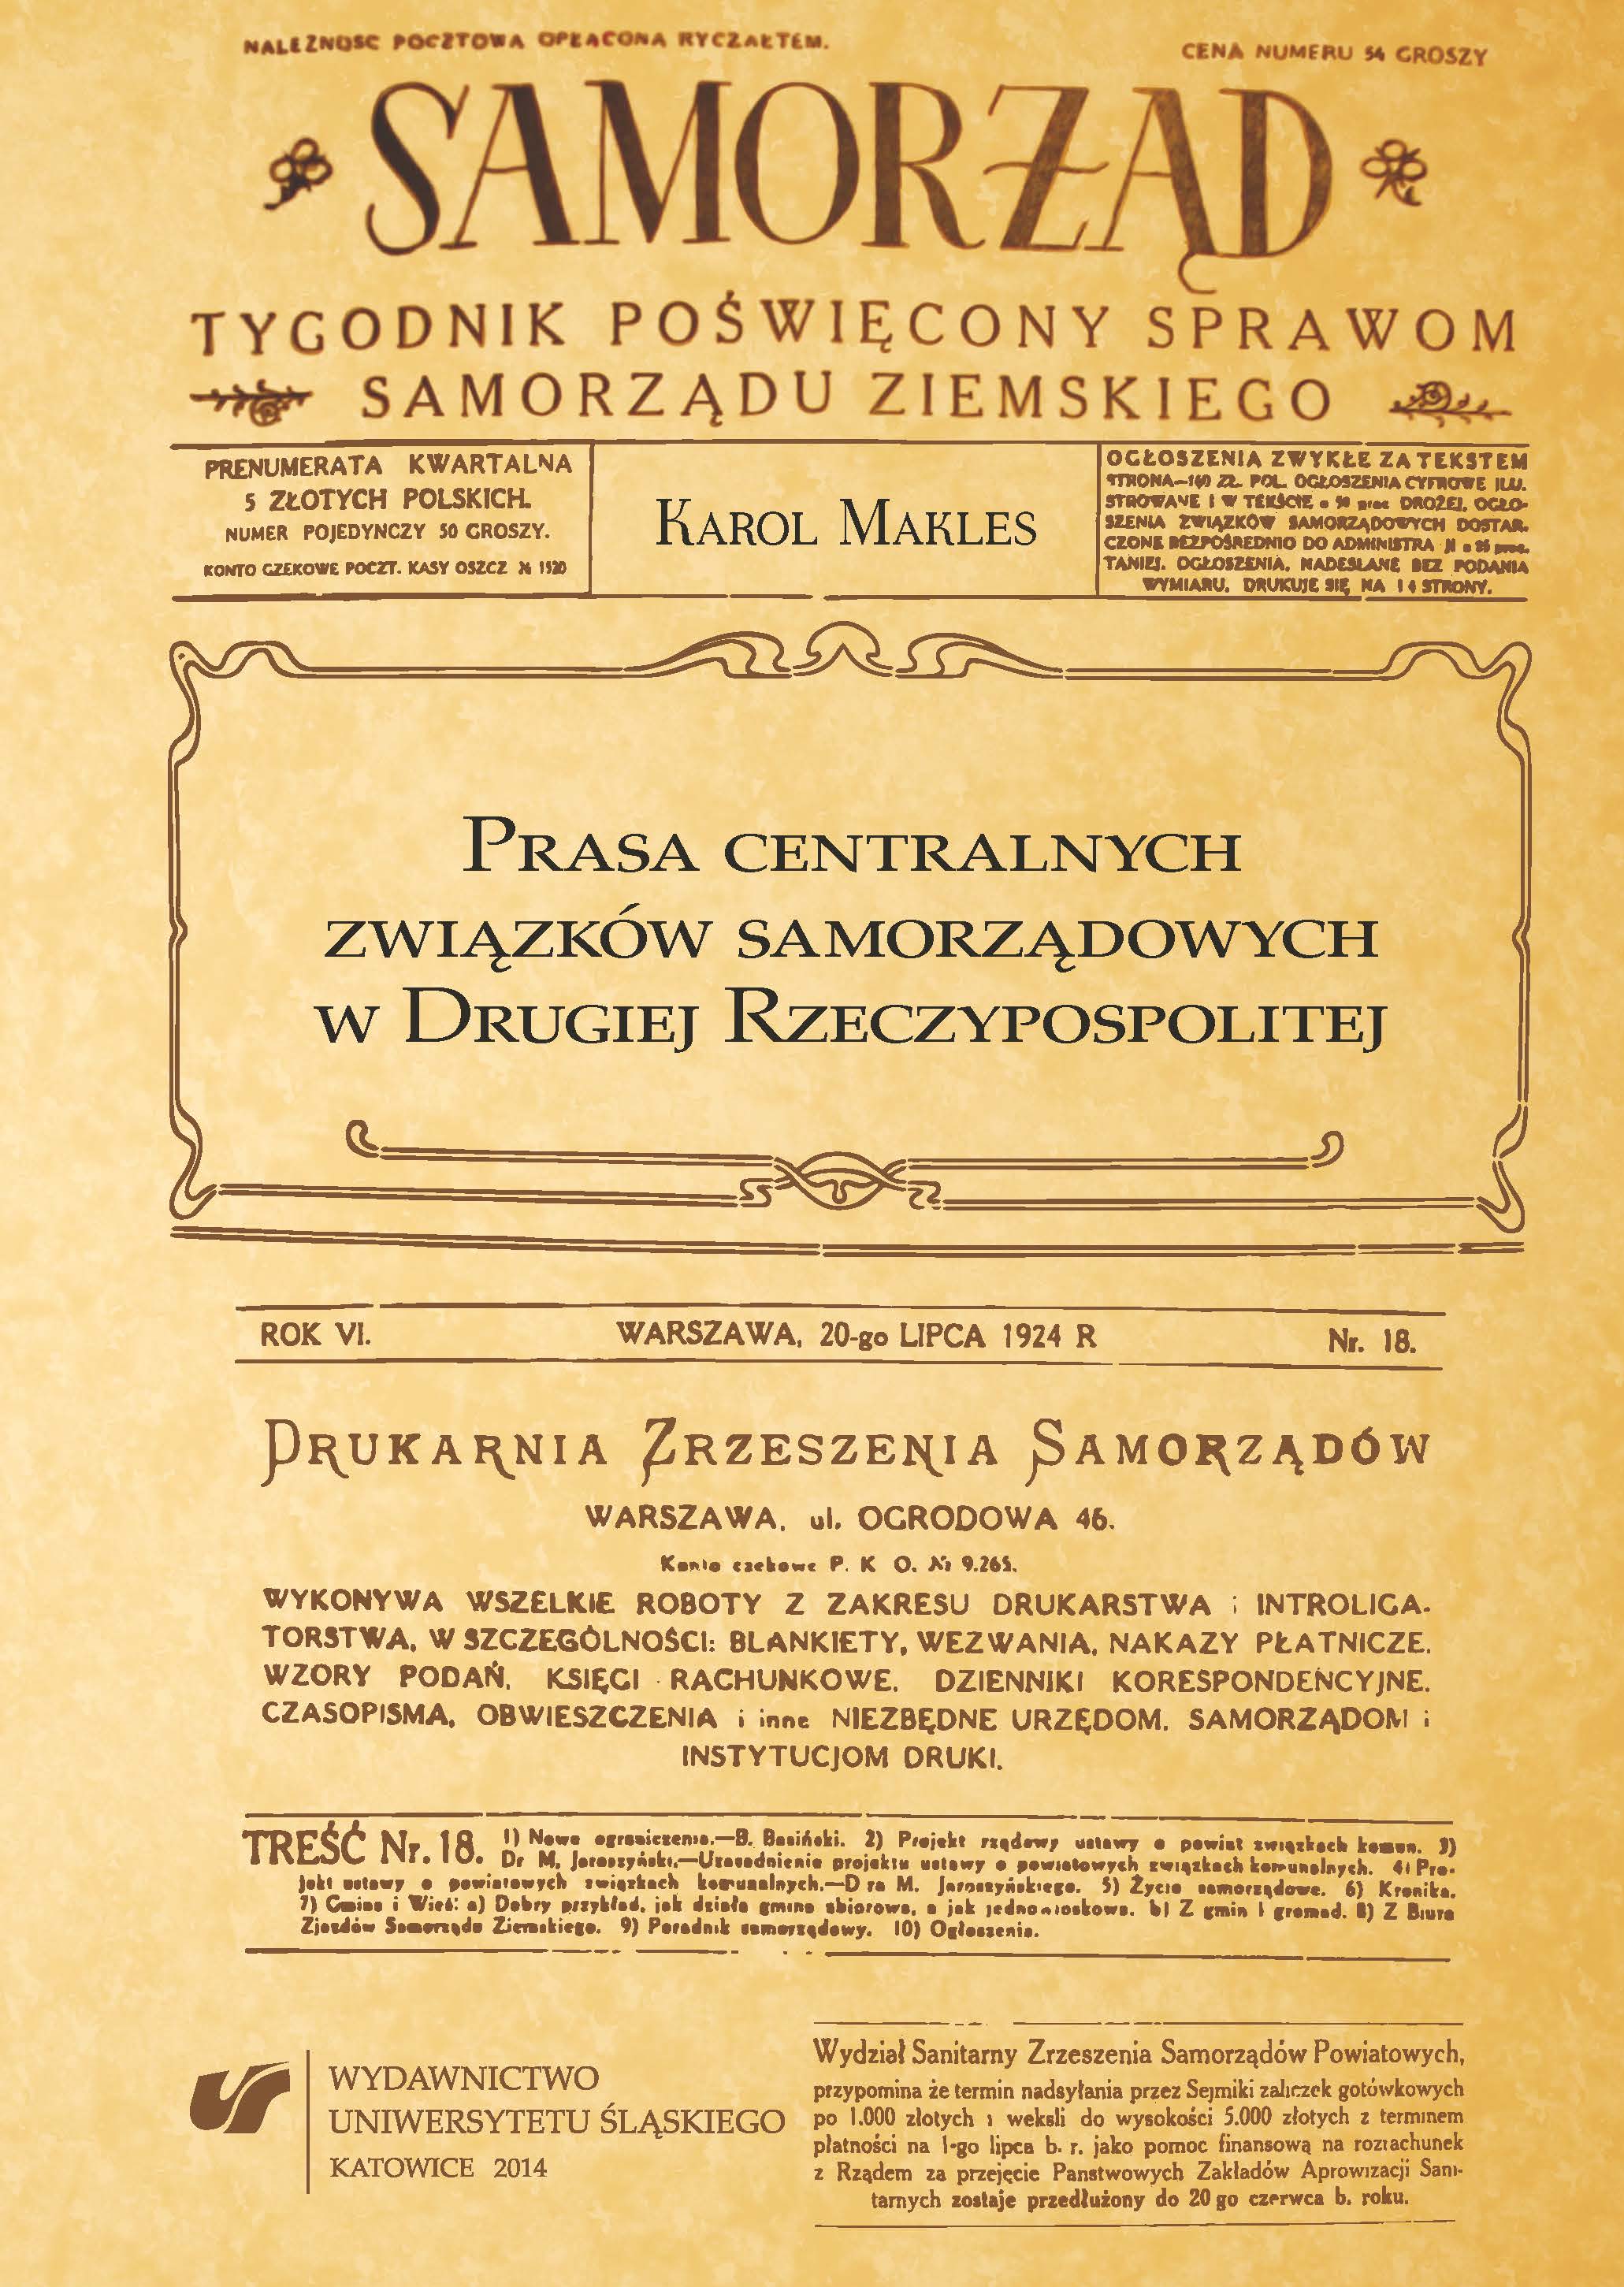 Press of the central government unions in Second Republic of Poland